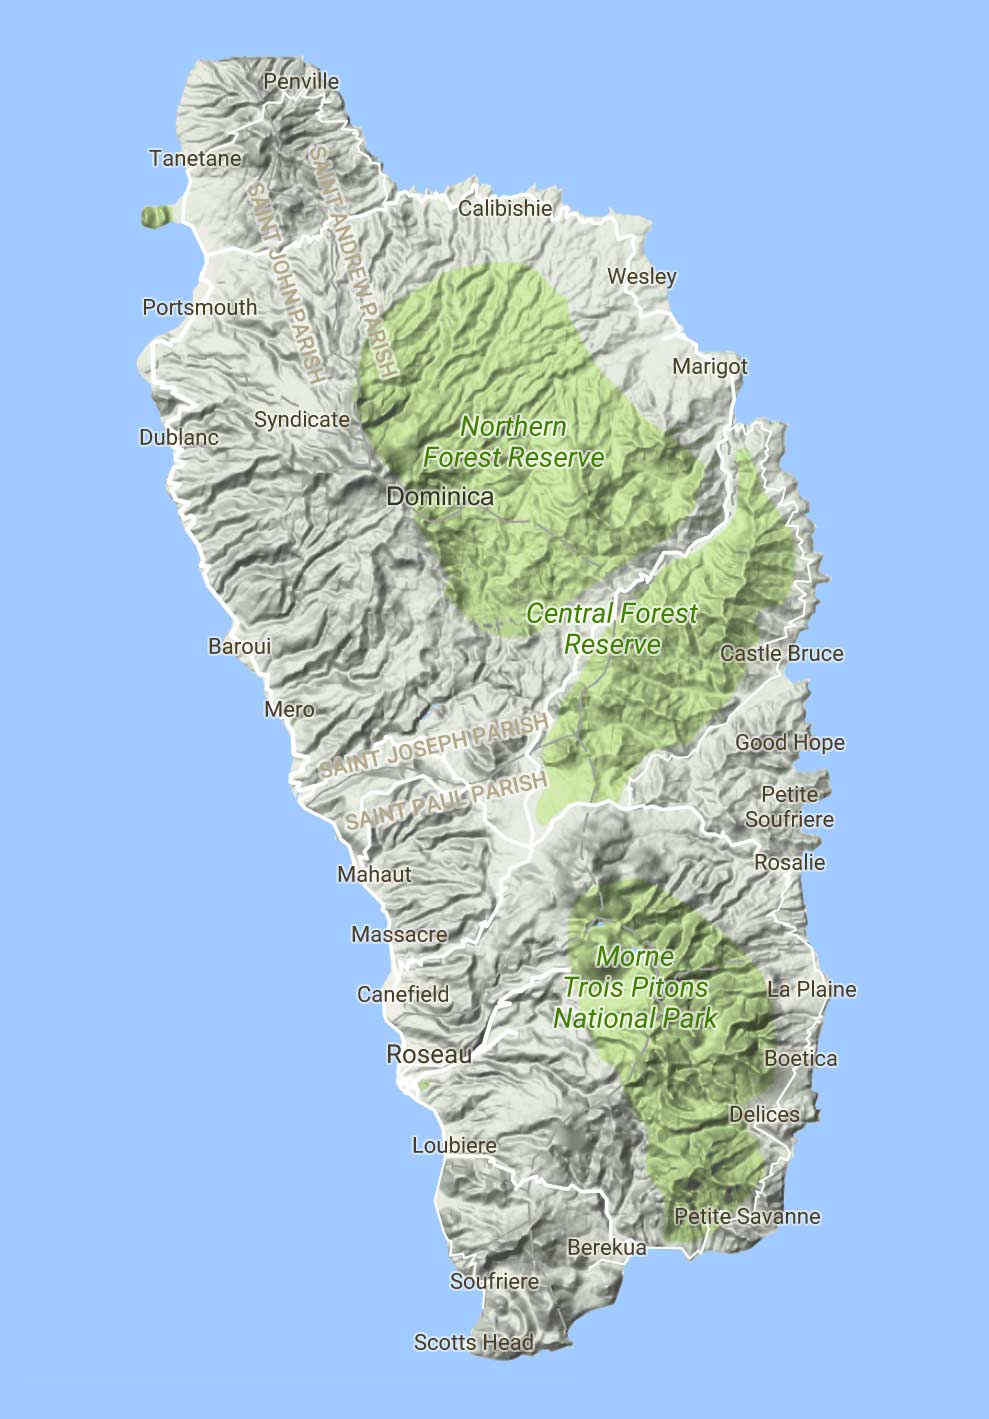 Topographic map of Dominica